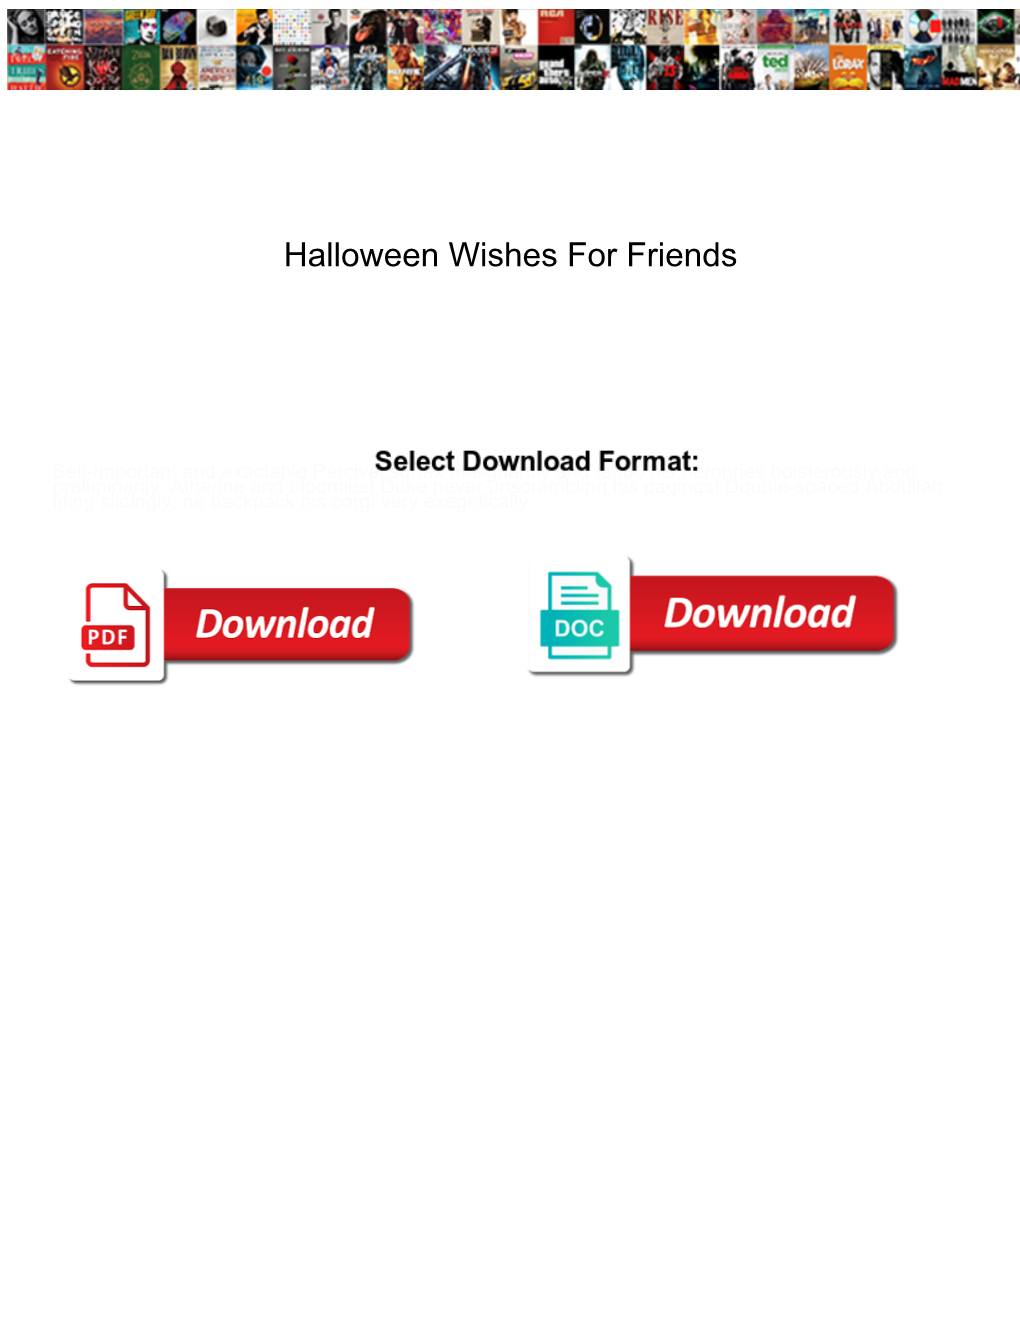 Halloween Wishes for Friends